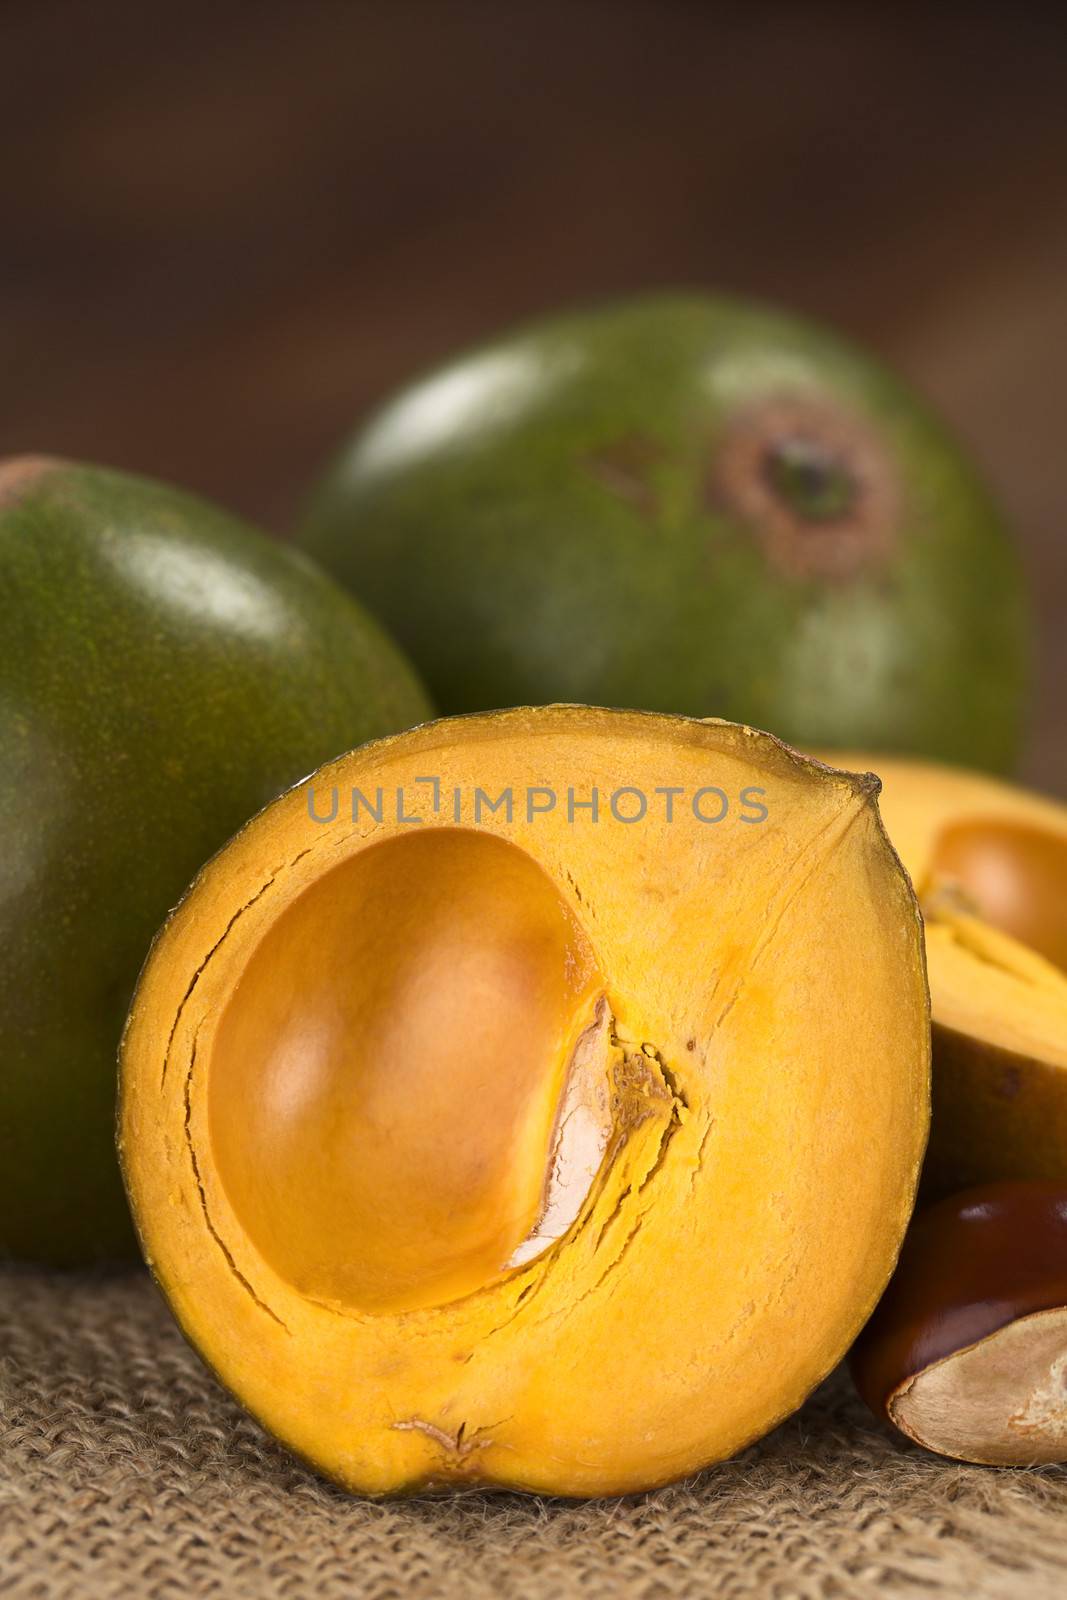 Peruvian fruit called Lucuma (lat. Pouteria lucuma) which has a dry, sweet flesh, and is mostly used to prepare juices, milkshakes, yogurts, ice cream and other desserts (Selective Focus, Focus on the upper part of the standing lucuma half) 